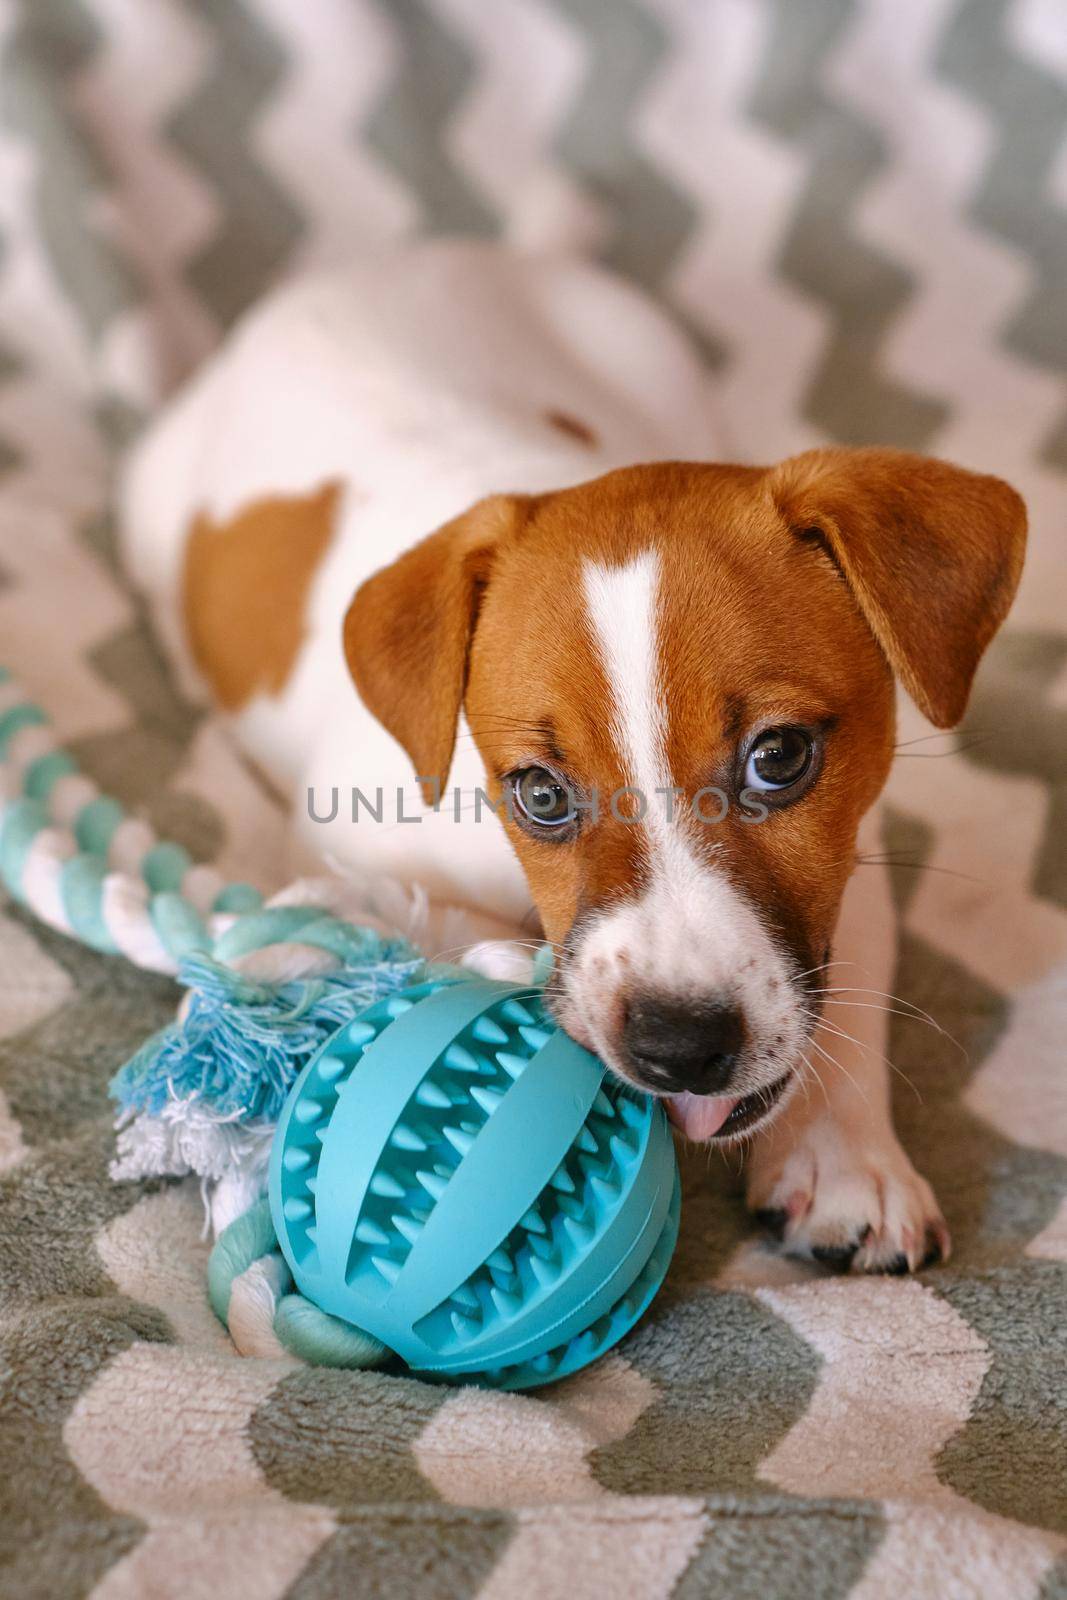 Cute Little Jack Russell Terrier puppy with teether ball. Six weeks Puppy playing with toy at home